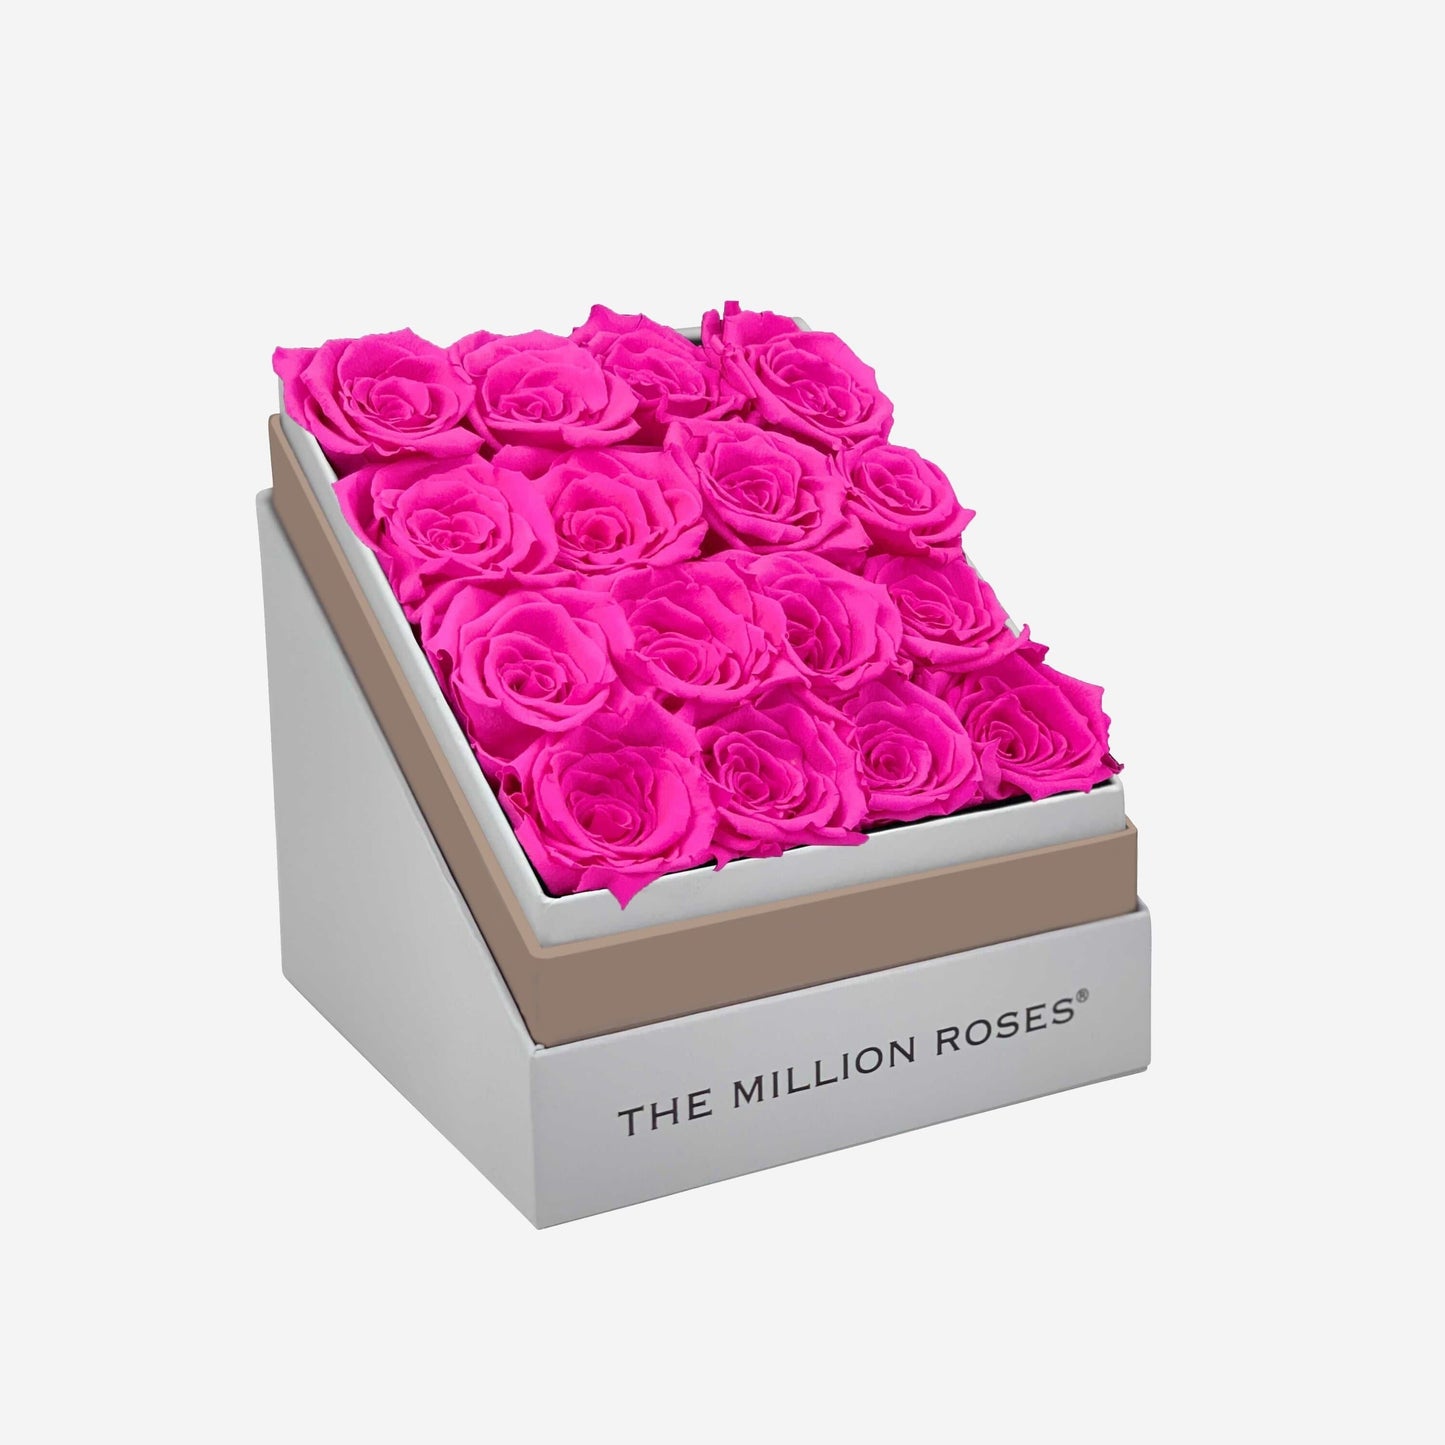 Square White Box | Neon Pink Roses - The Million Roses